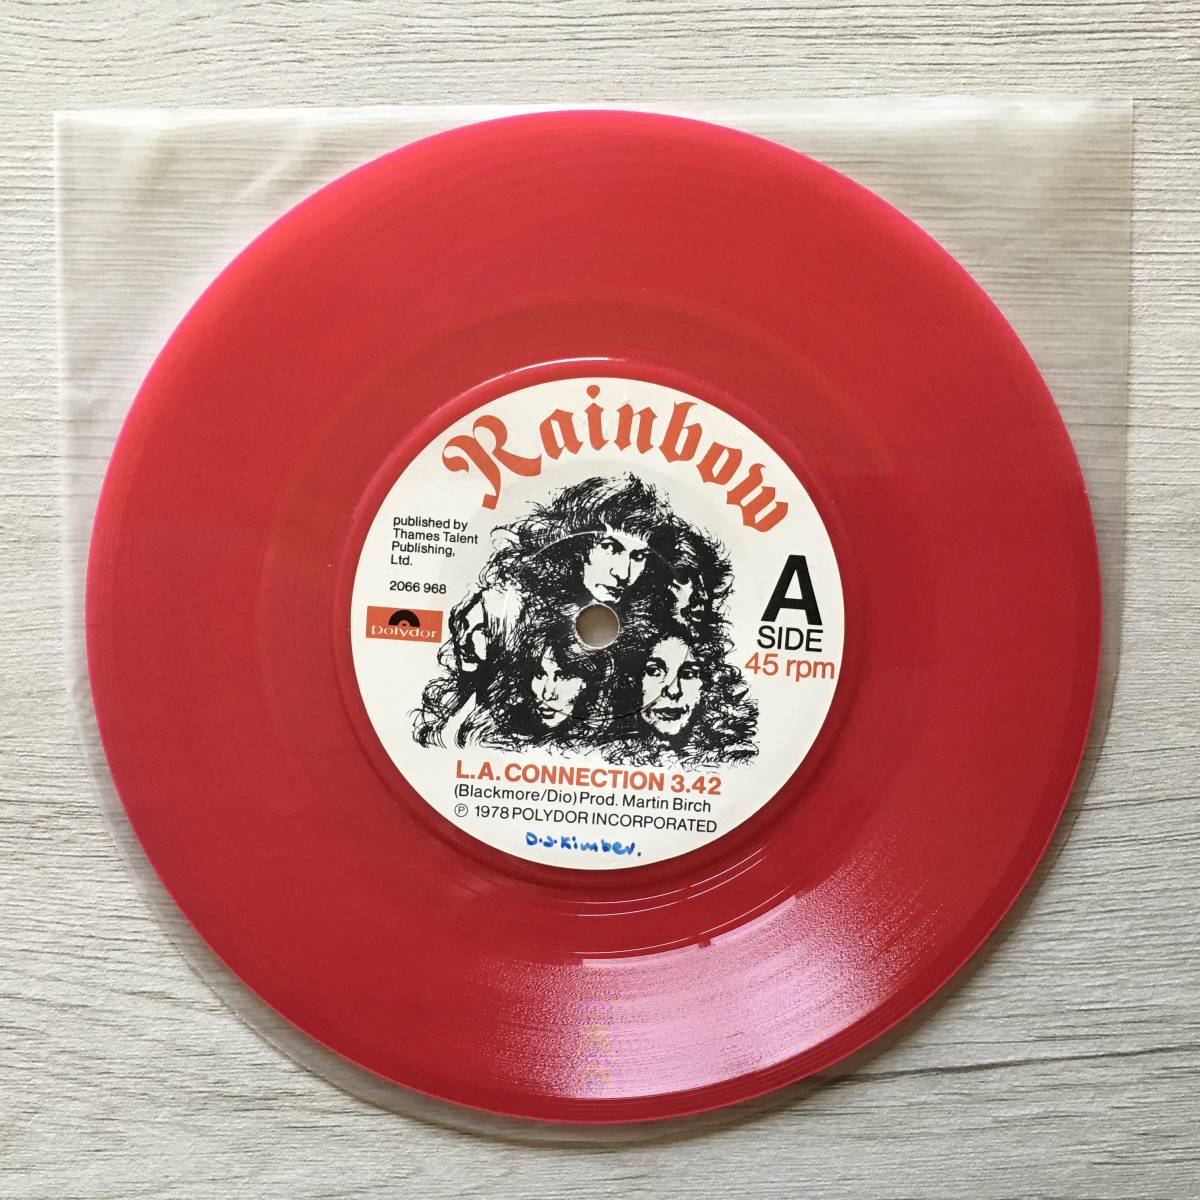 RAINBOW L.A. CONNECTION UK record 